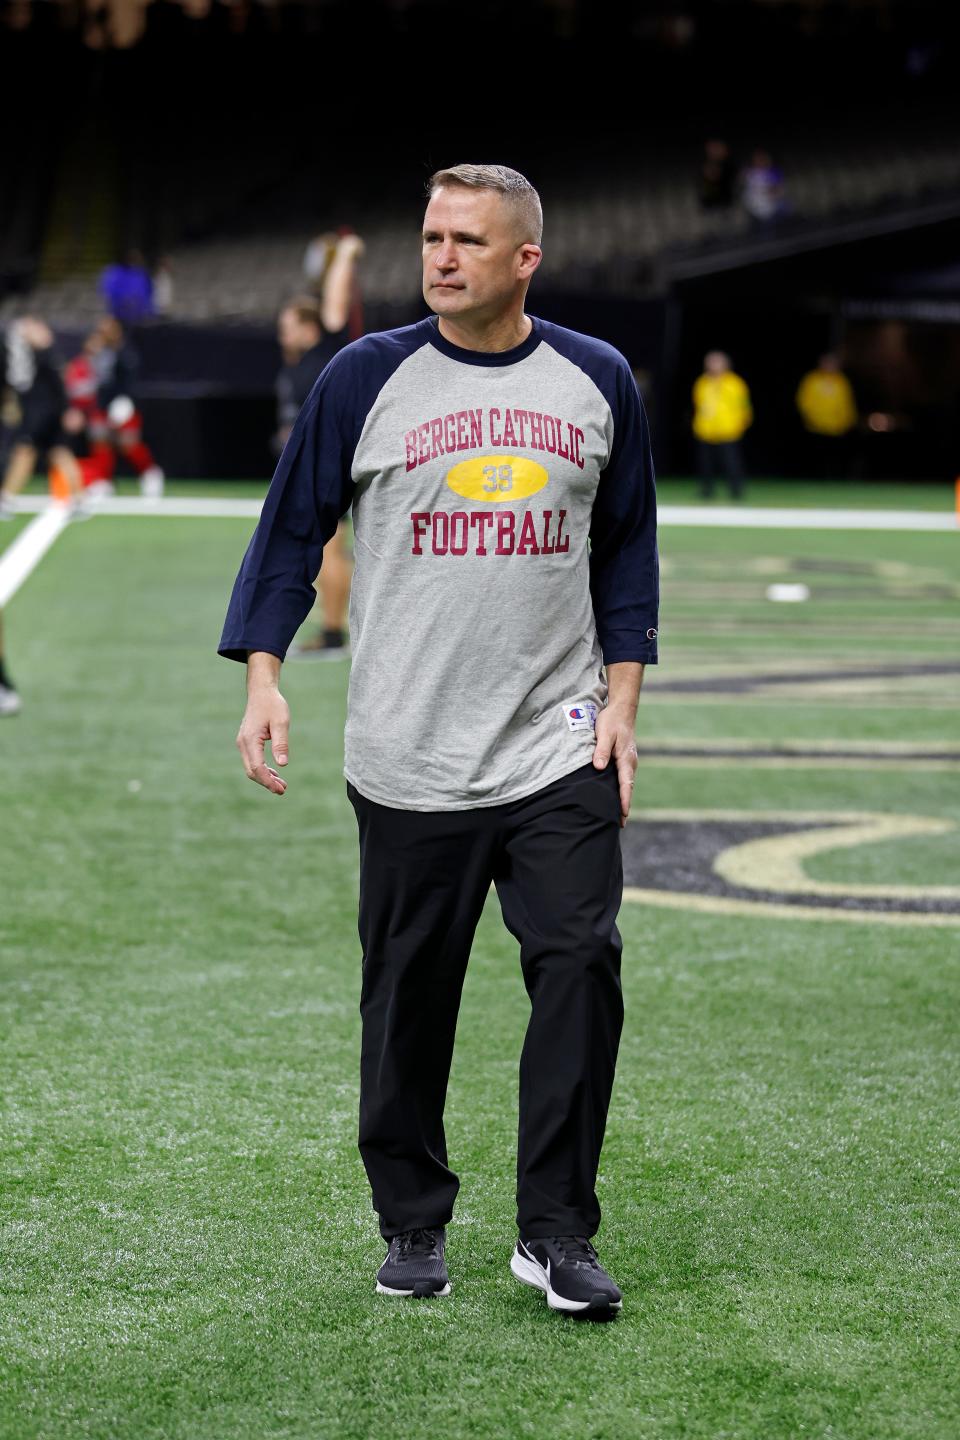 New Orleans Saints special teams coordinator Darren Rizzi wears a Bergen Catholic Football shirt before an NFL football game against the New York Giants, Sunday, Dec. 17, 2023, in New Orleans. (AP Photo/Tyler Kaufman)